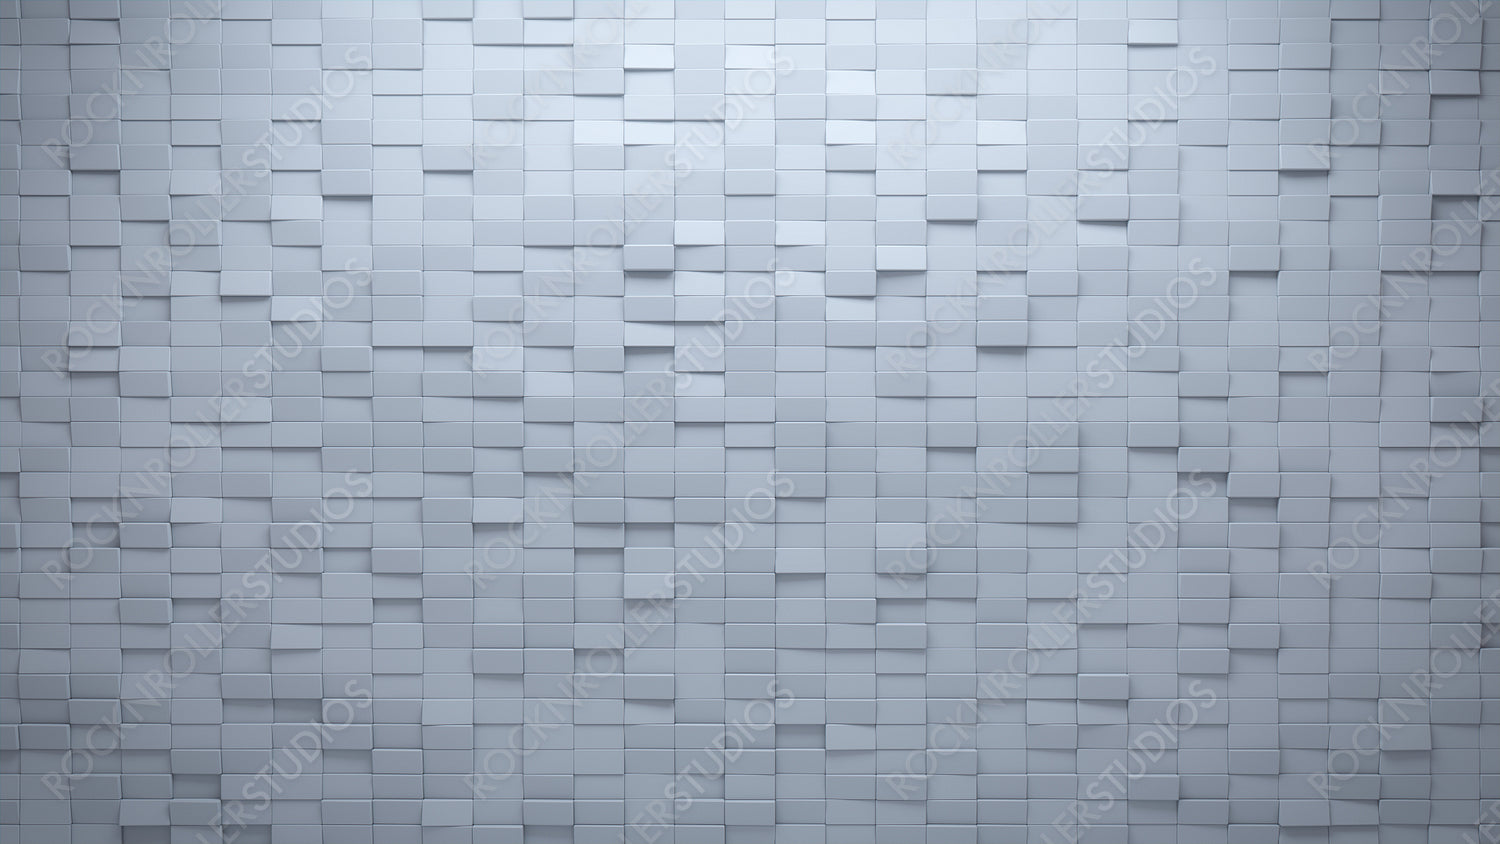 Polished, Futuristic Wall background with tiles. Rectangular, tile Wallpaper with 3D, White blocks. 3D Render